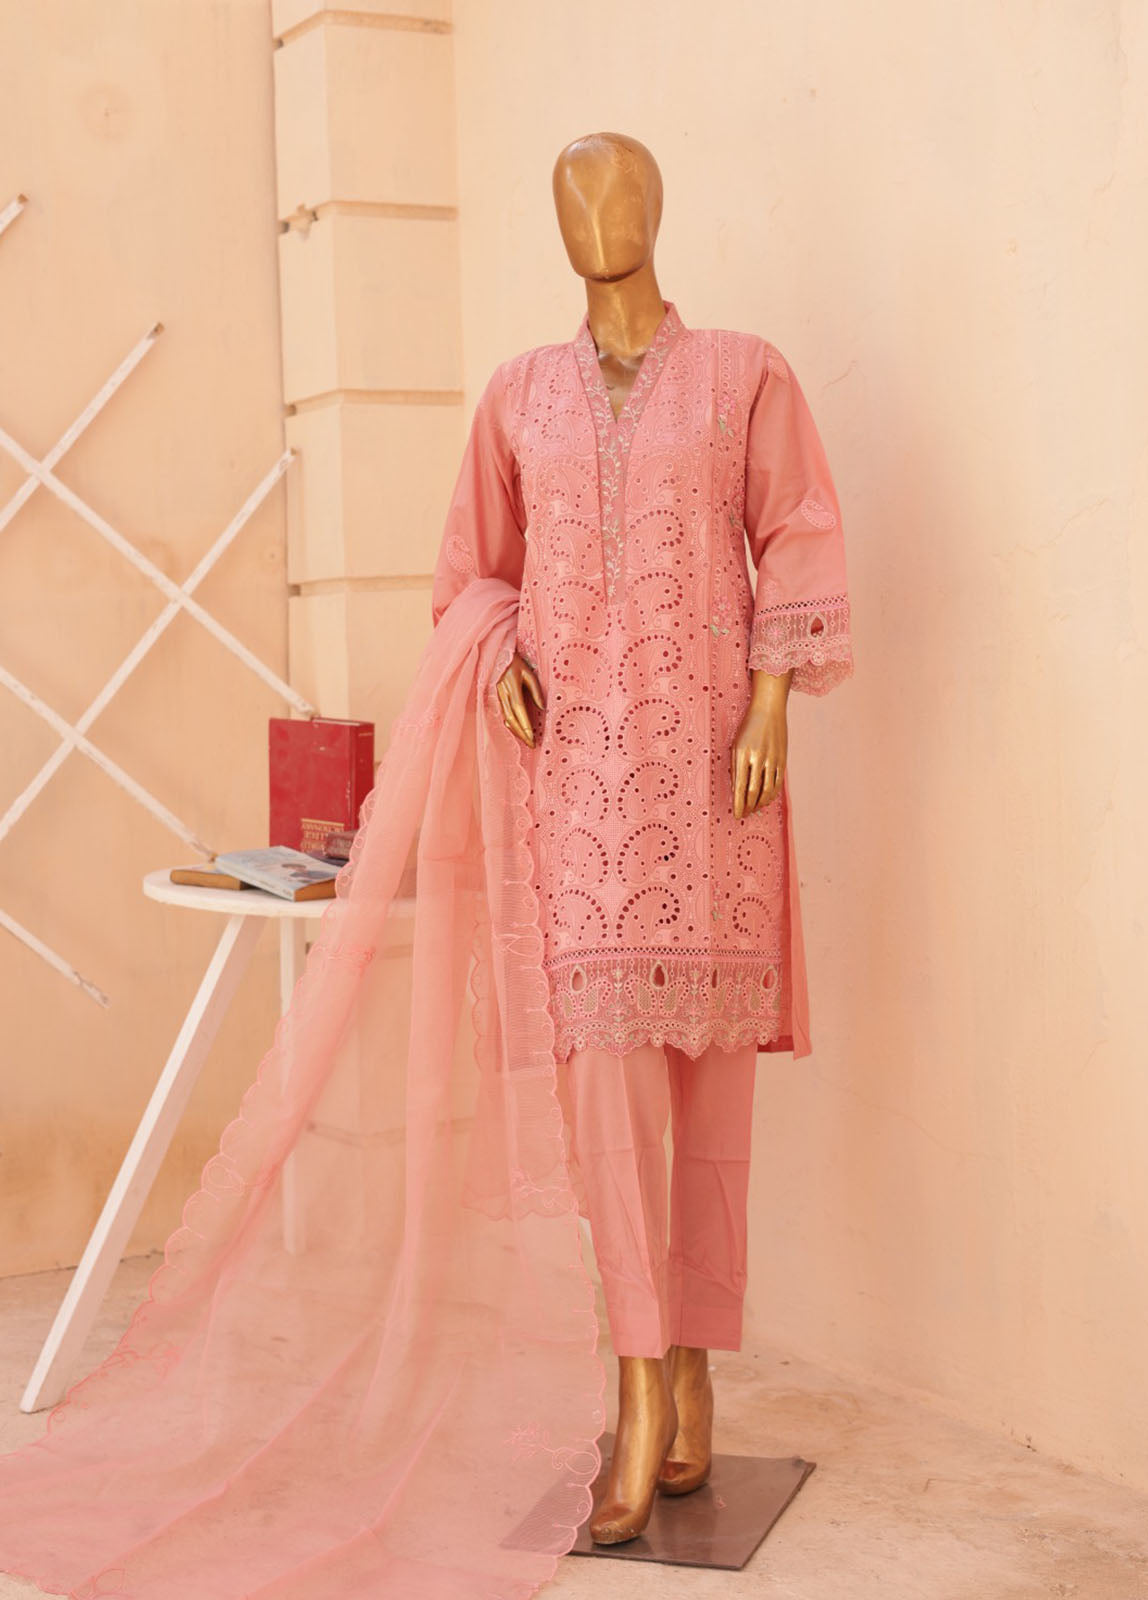 WCTF-015 C- 3 Piece Embroidered Stitched Suit